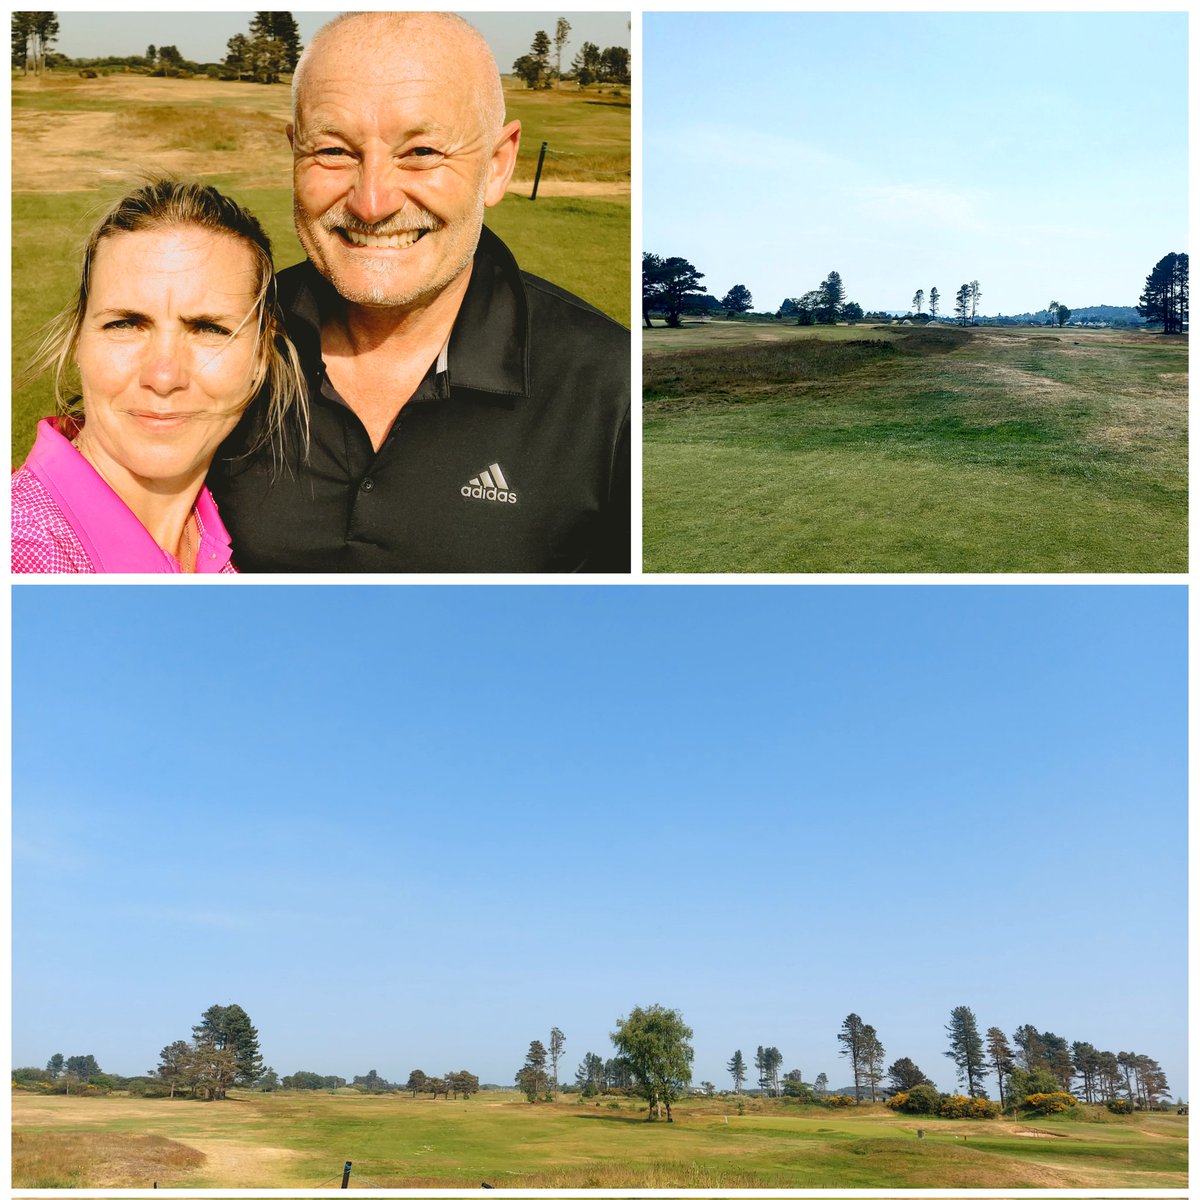 What a fab day playing The Ashludie course at @MonifiethLinks yesterday as part of my Scotland roadtrip! Was stunning! And amazing to see the fantastic @drjillianharley ....so nice to catch up! #scotlandroadtrip #moregolf #monifeith #friendsfun ⛳️💚🥰